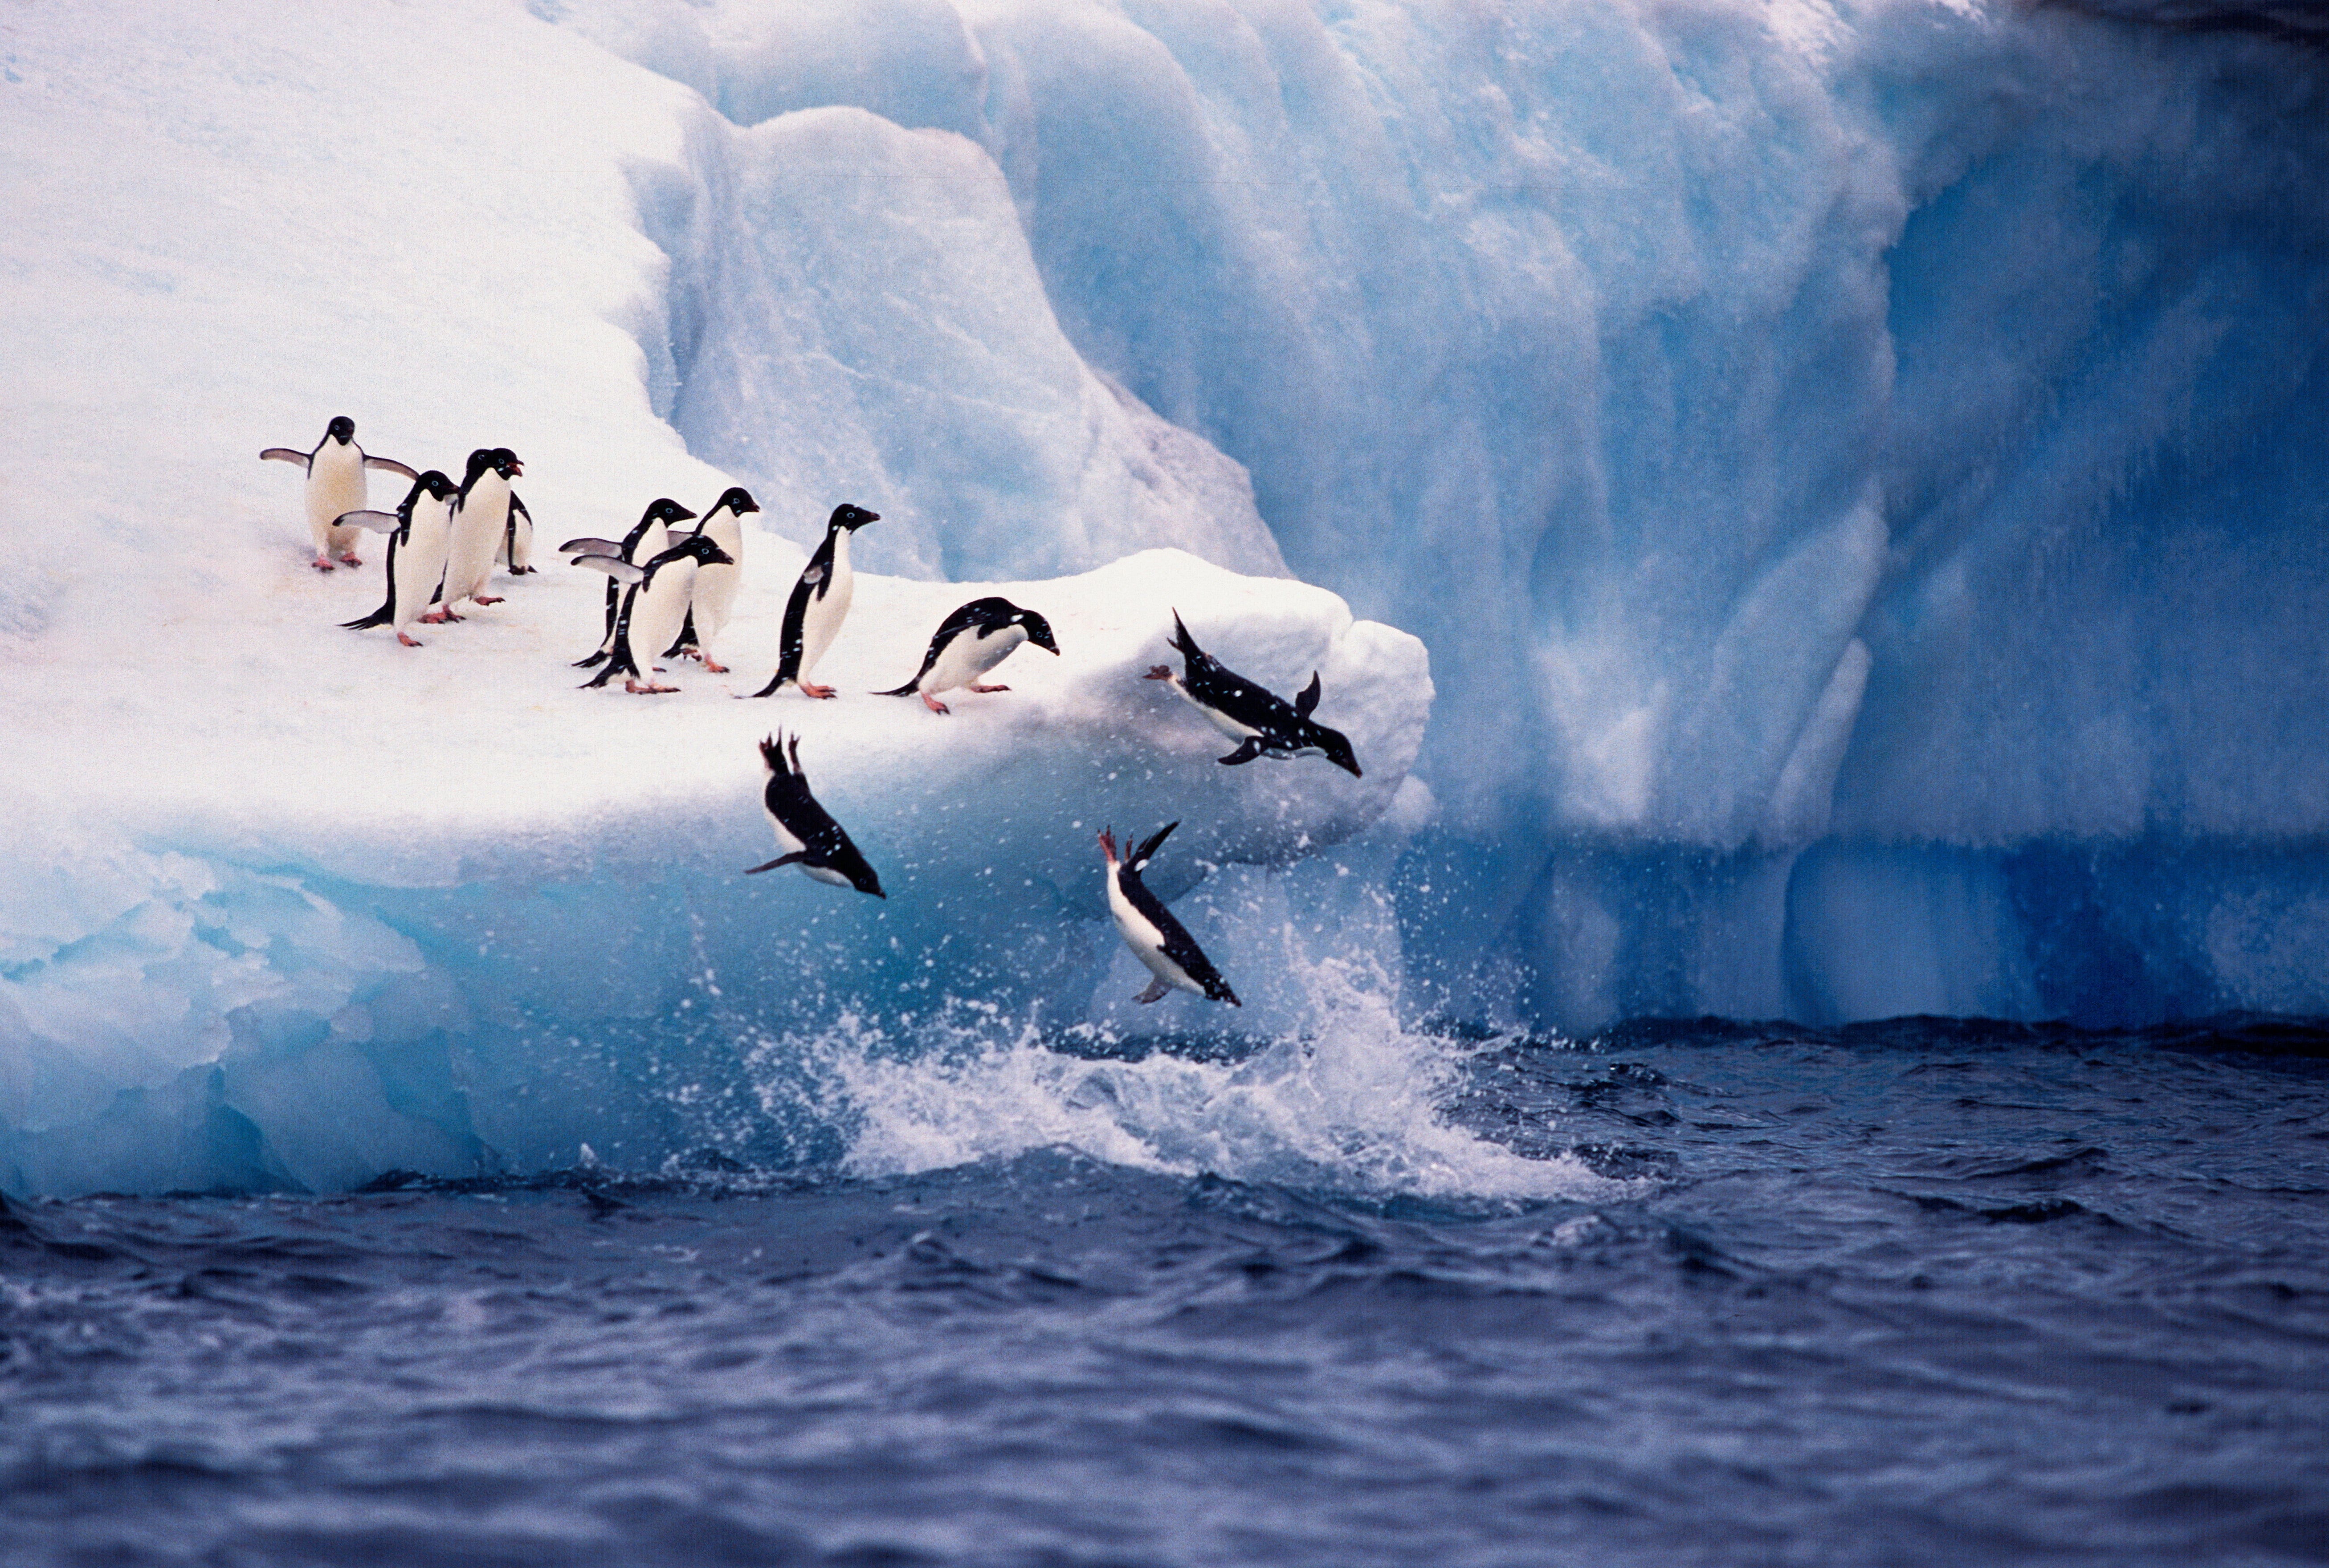 Adelie penguins are among the species threatened by the dramatic Antarctic change